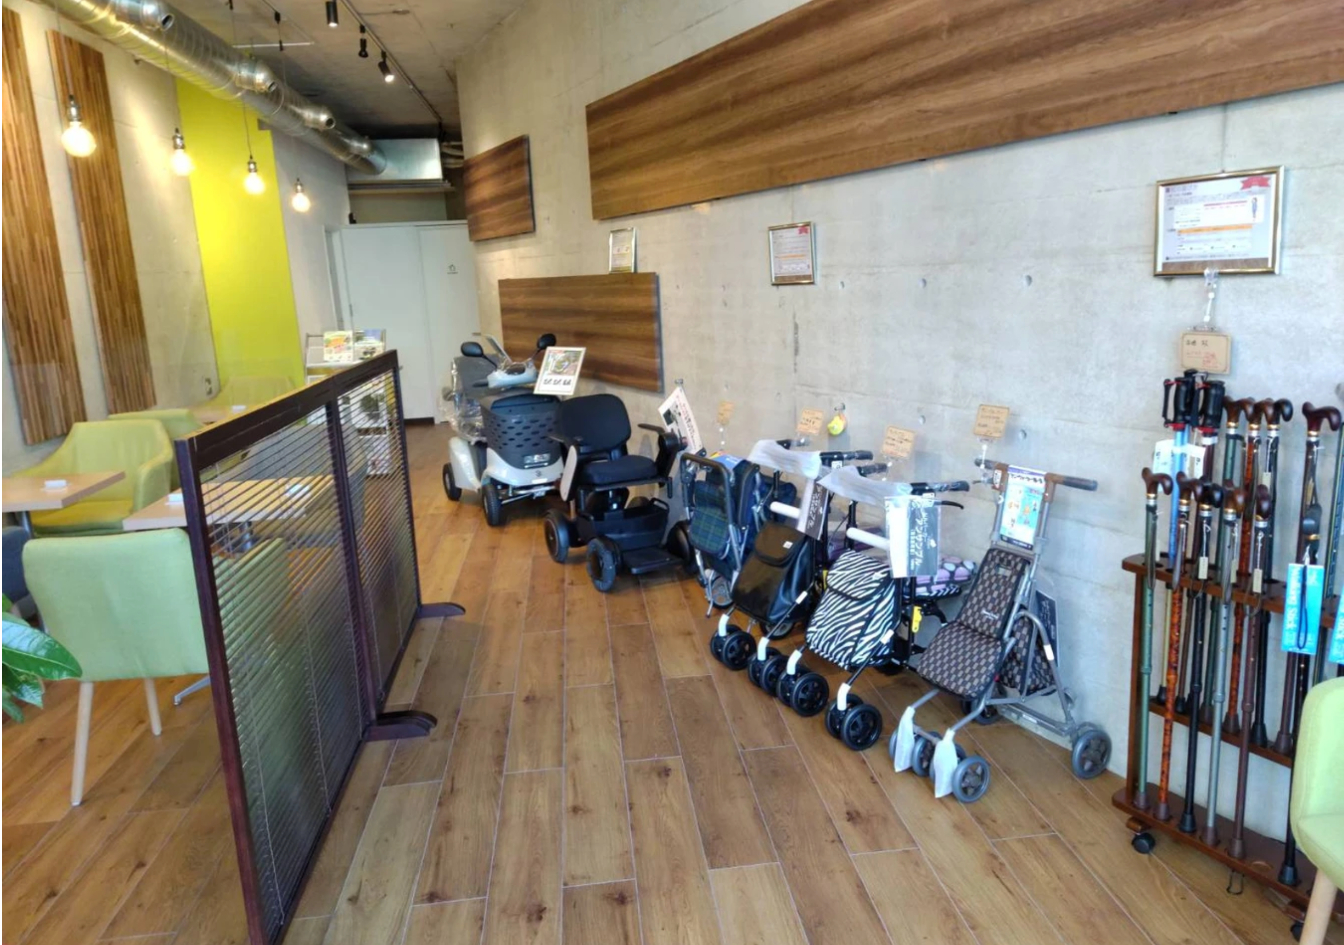 Coffee, tea, or mobility? Tokyo cafe offers welfare equipment for elderly clients